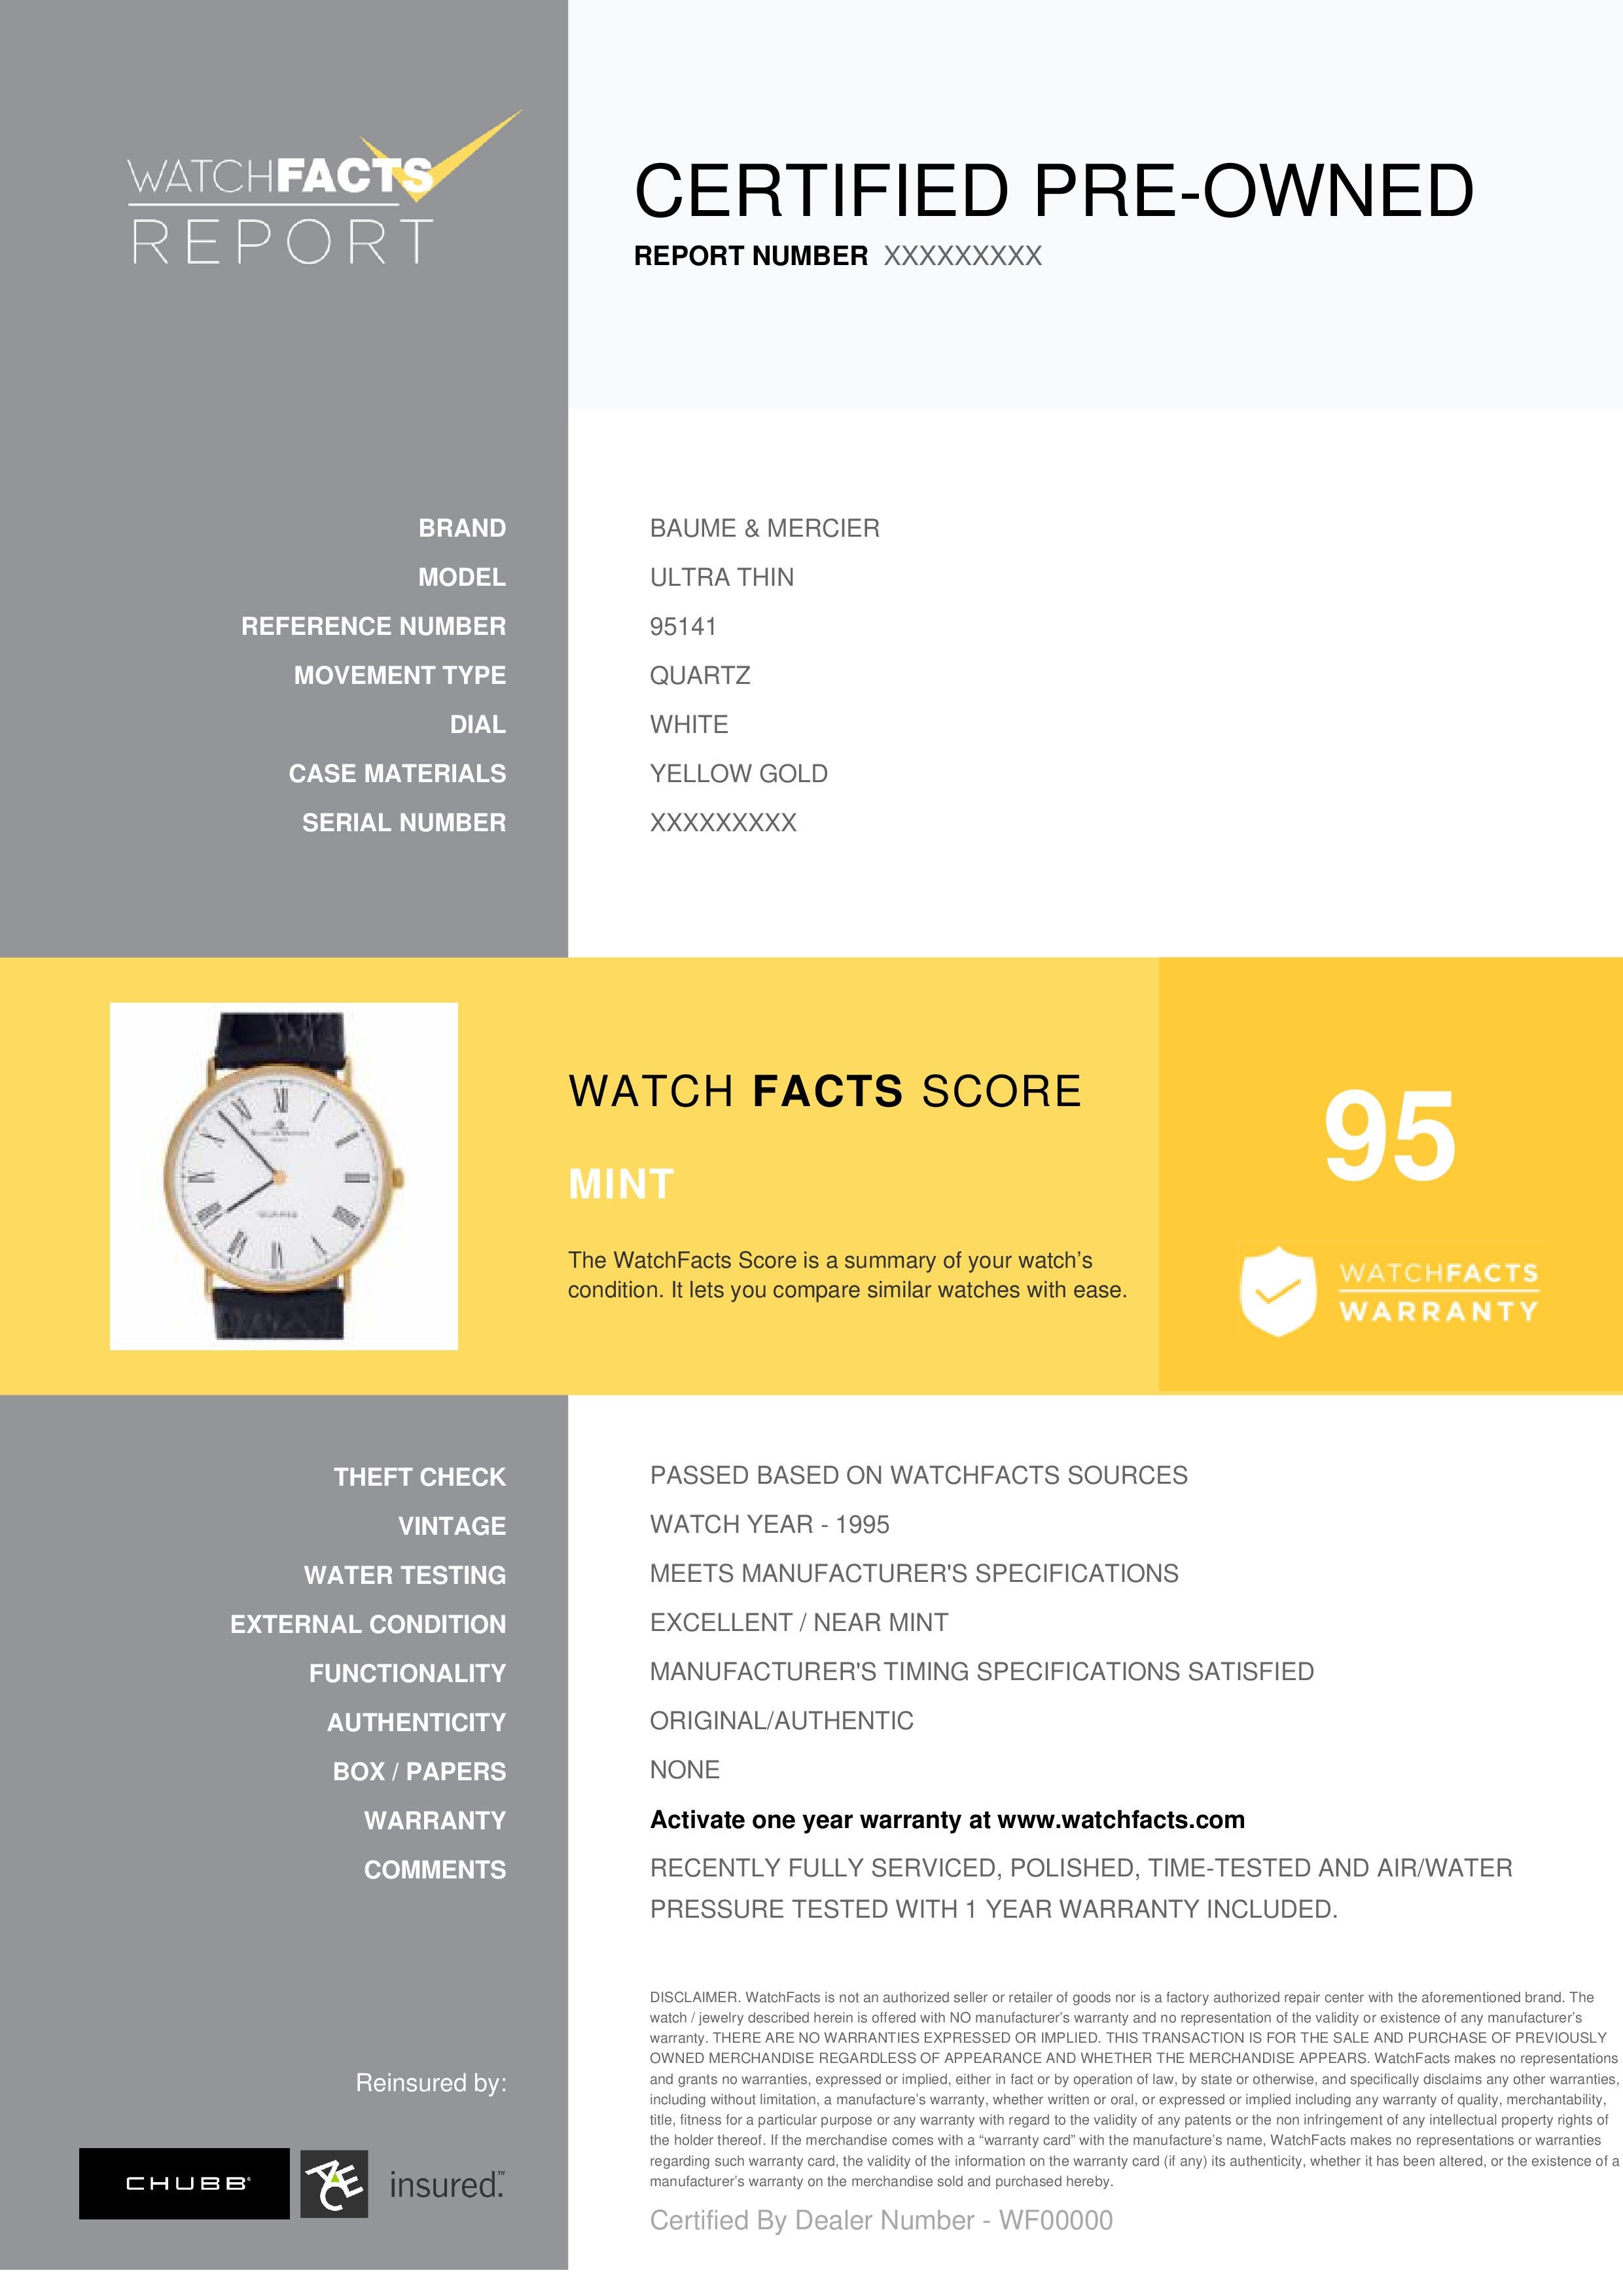 Baume & Mercier Ultra Thin Reference #: 95141. Mens Quartz Watch Yellow Gold White 32 MM. Verified and Certified by WatchFacts. 1 year warranty offered by WatchFacts.
